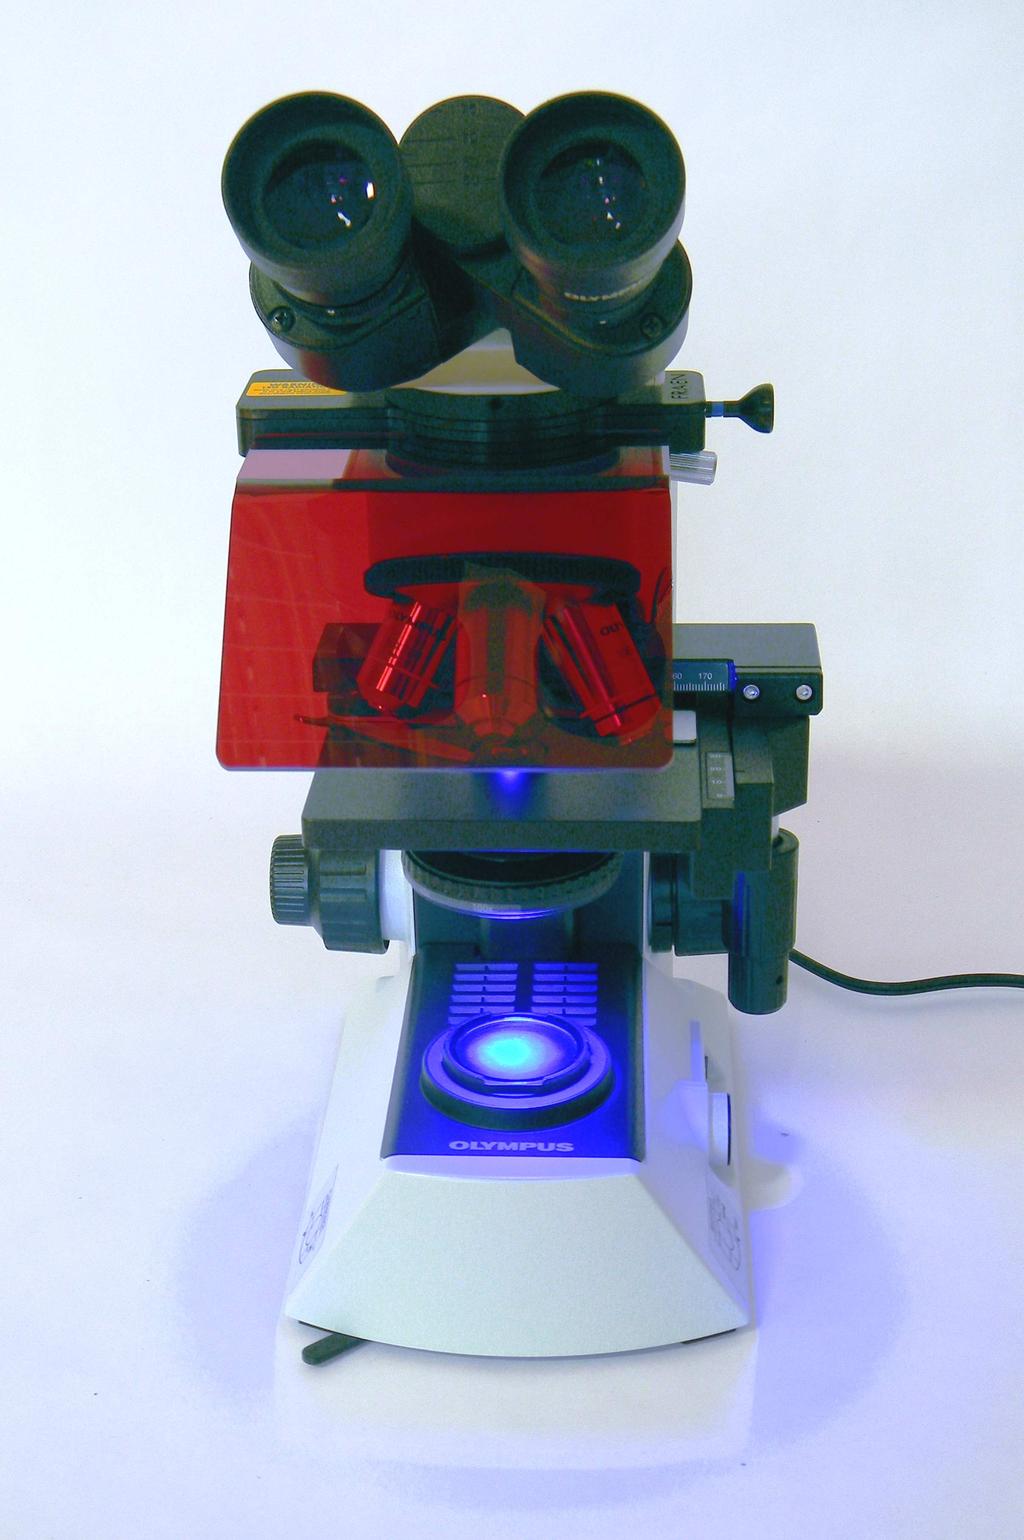 FLUOLED 21 the plug-and- play microscope for TB (Mycobacterium tuberculosis), based on Olympus CX 21 microscope With fully integrated Royal Blue and White LED illumination (long life light emitting